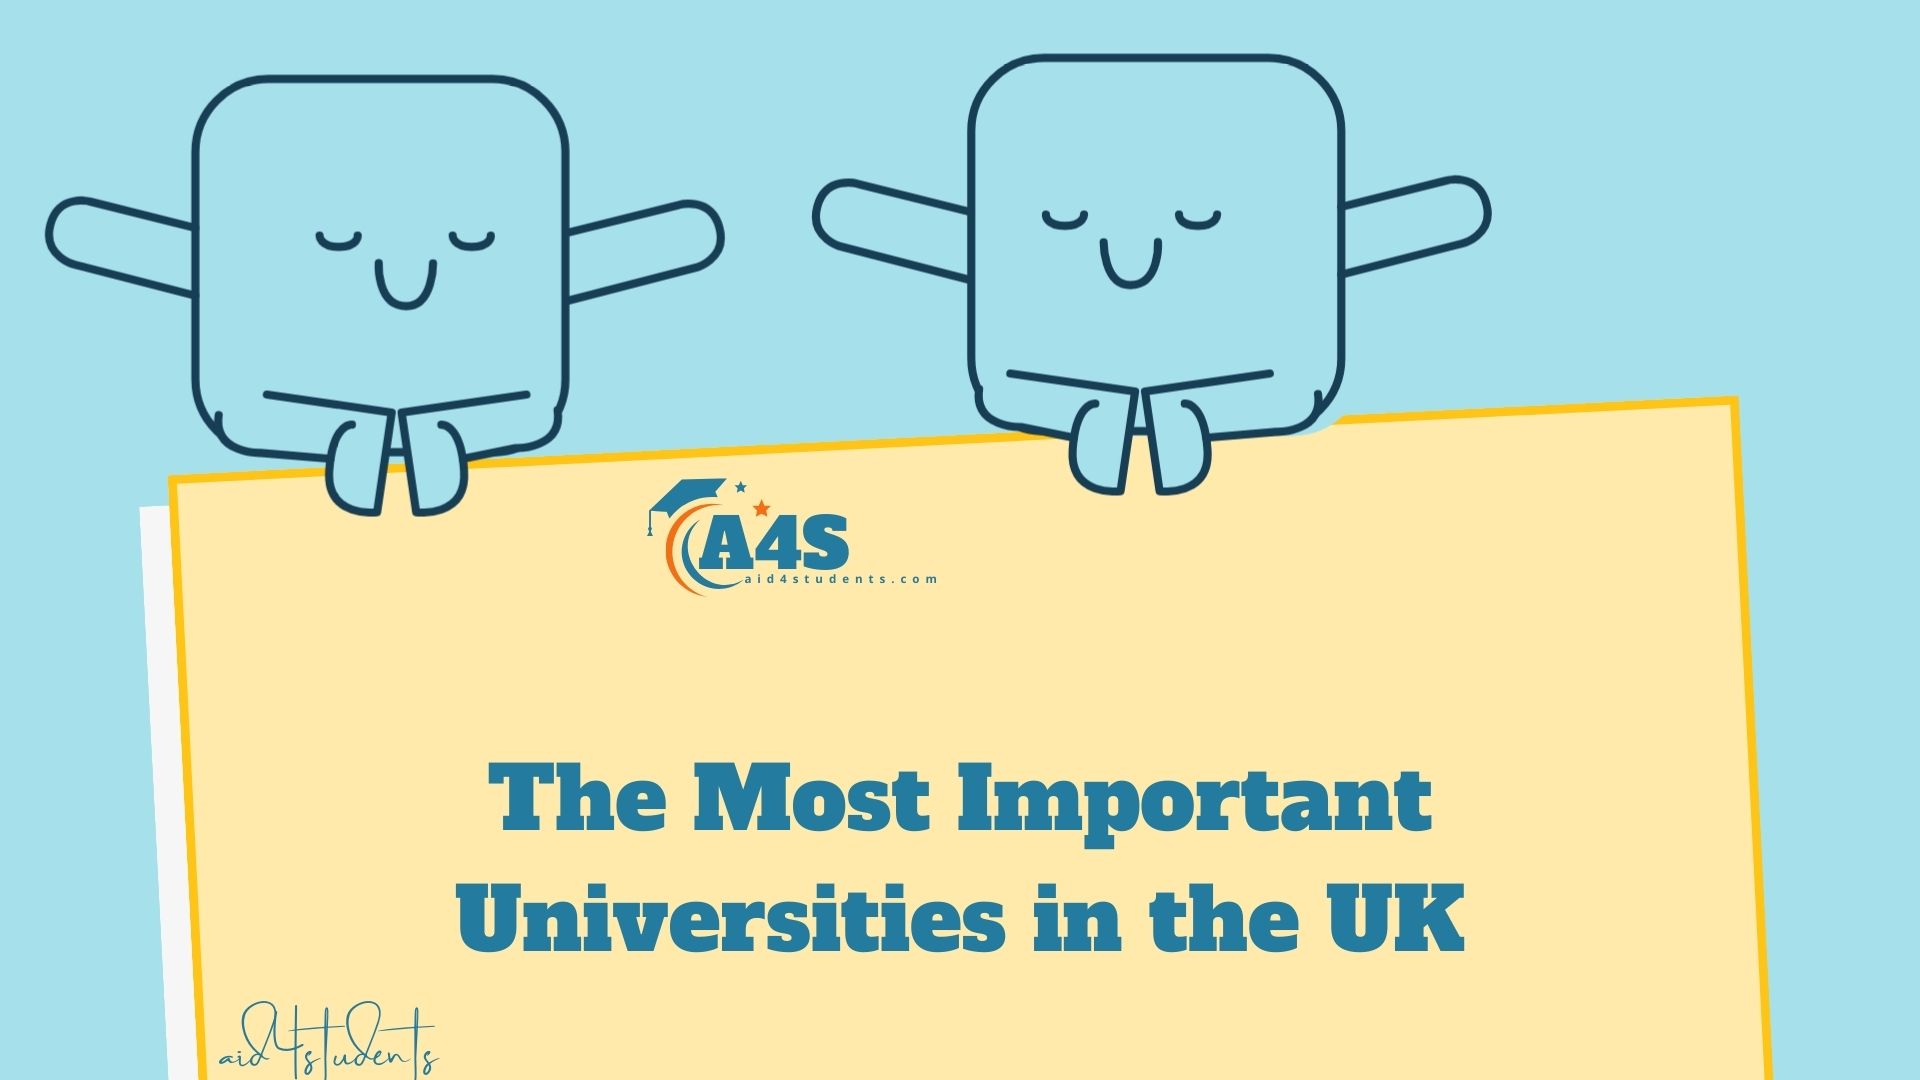 The Most Important Universities in the UK